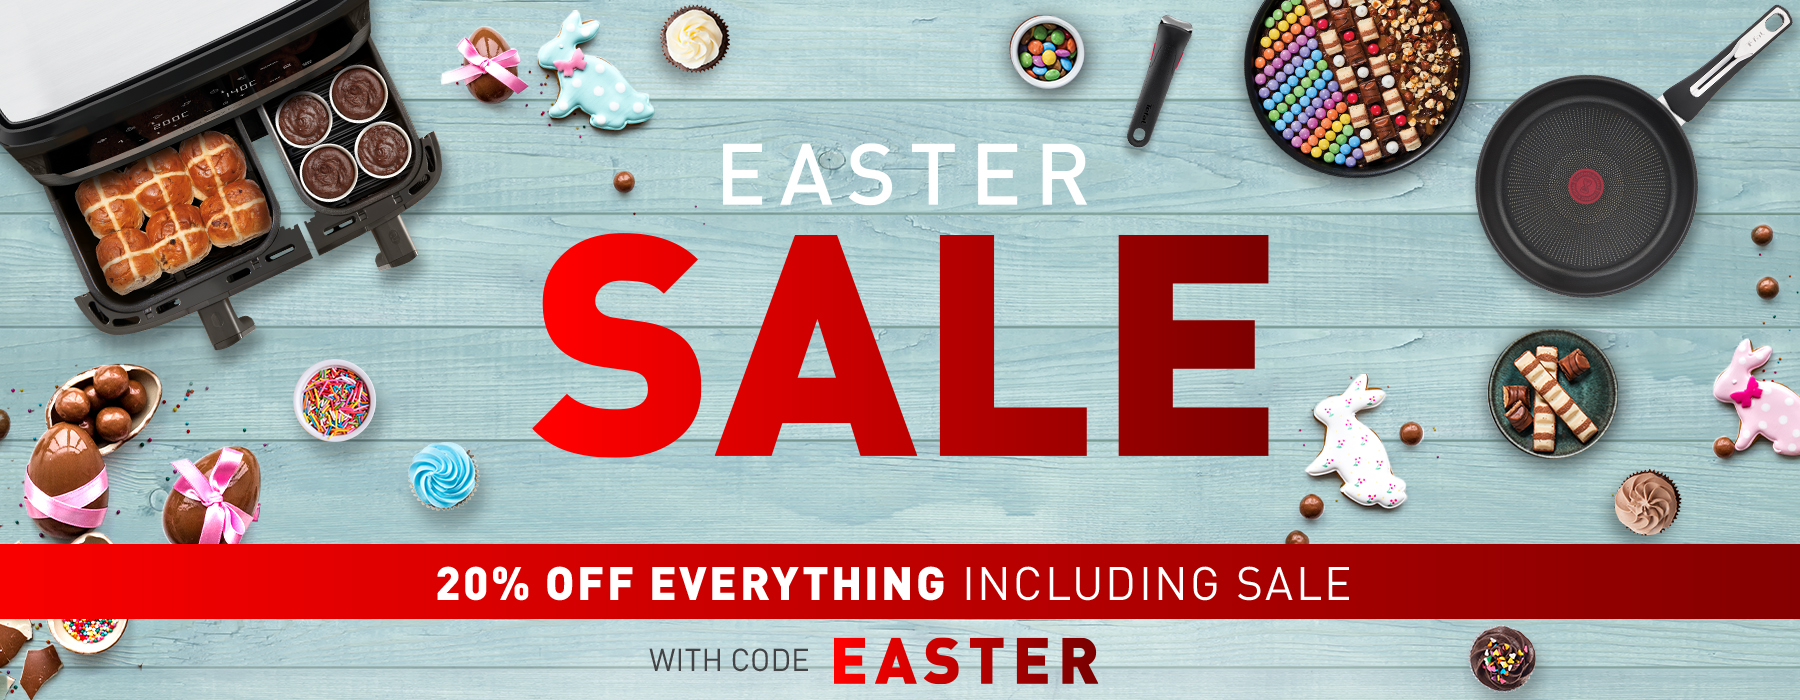 cate-promo-banner-Easter Sale 20% Off Everything